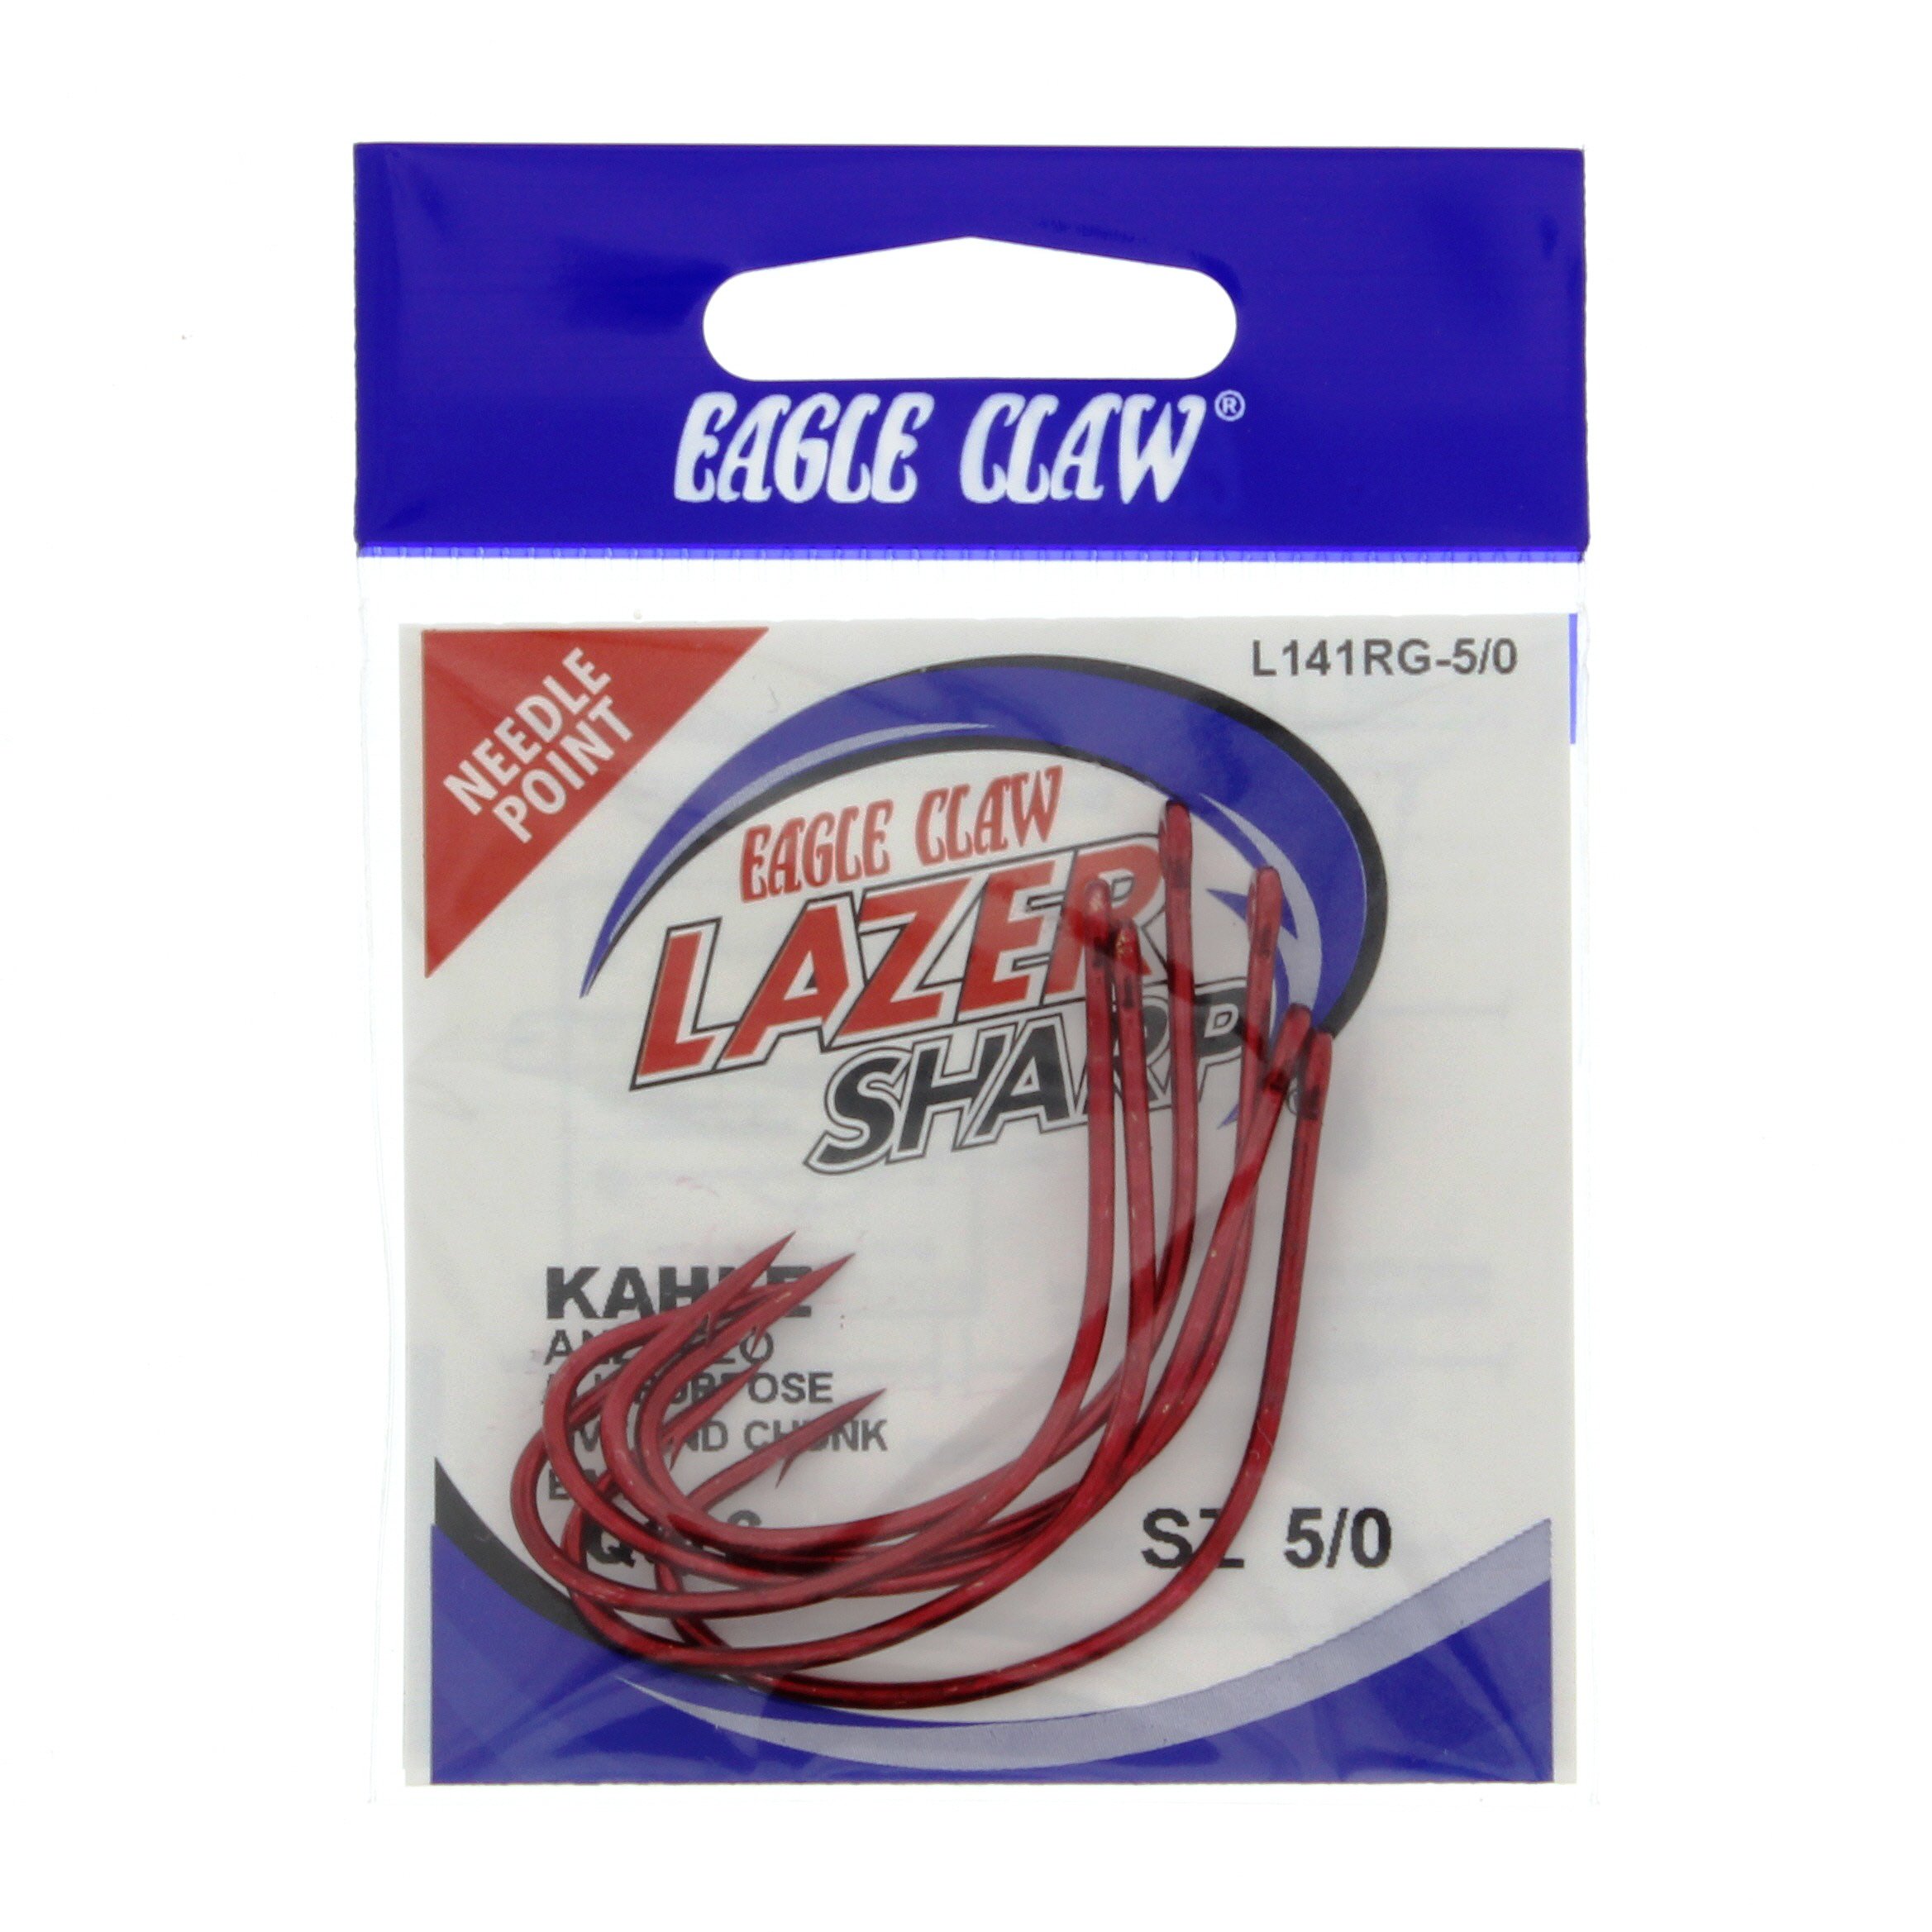 EAGLE CLAW LAZER PLAIN SHANK OFFSET SNELL 5/0 GOLD 178 HOOK CHOOSE QTY 25,50,100 